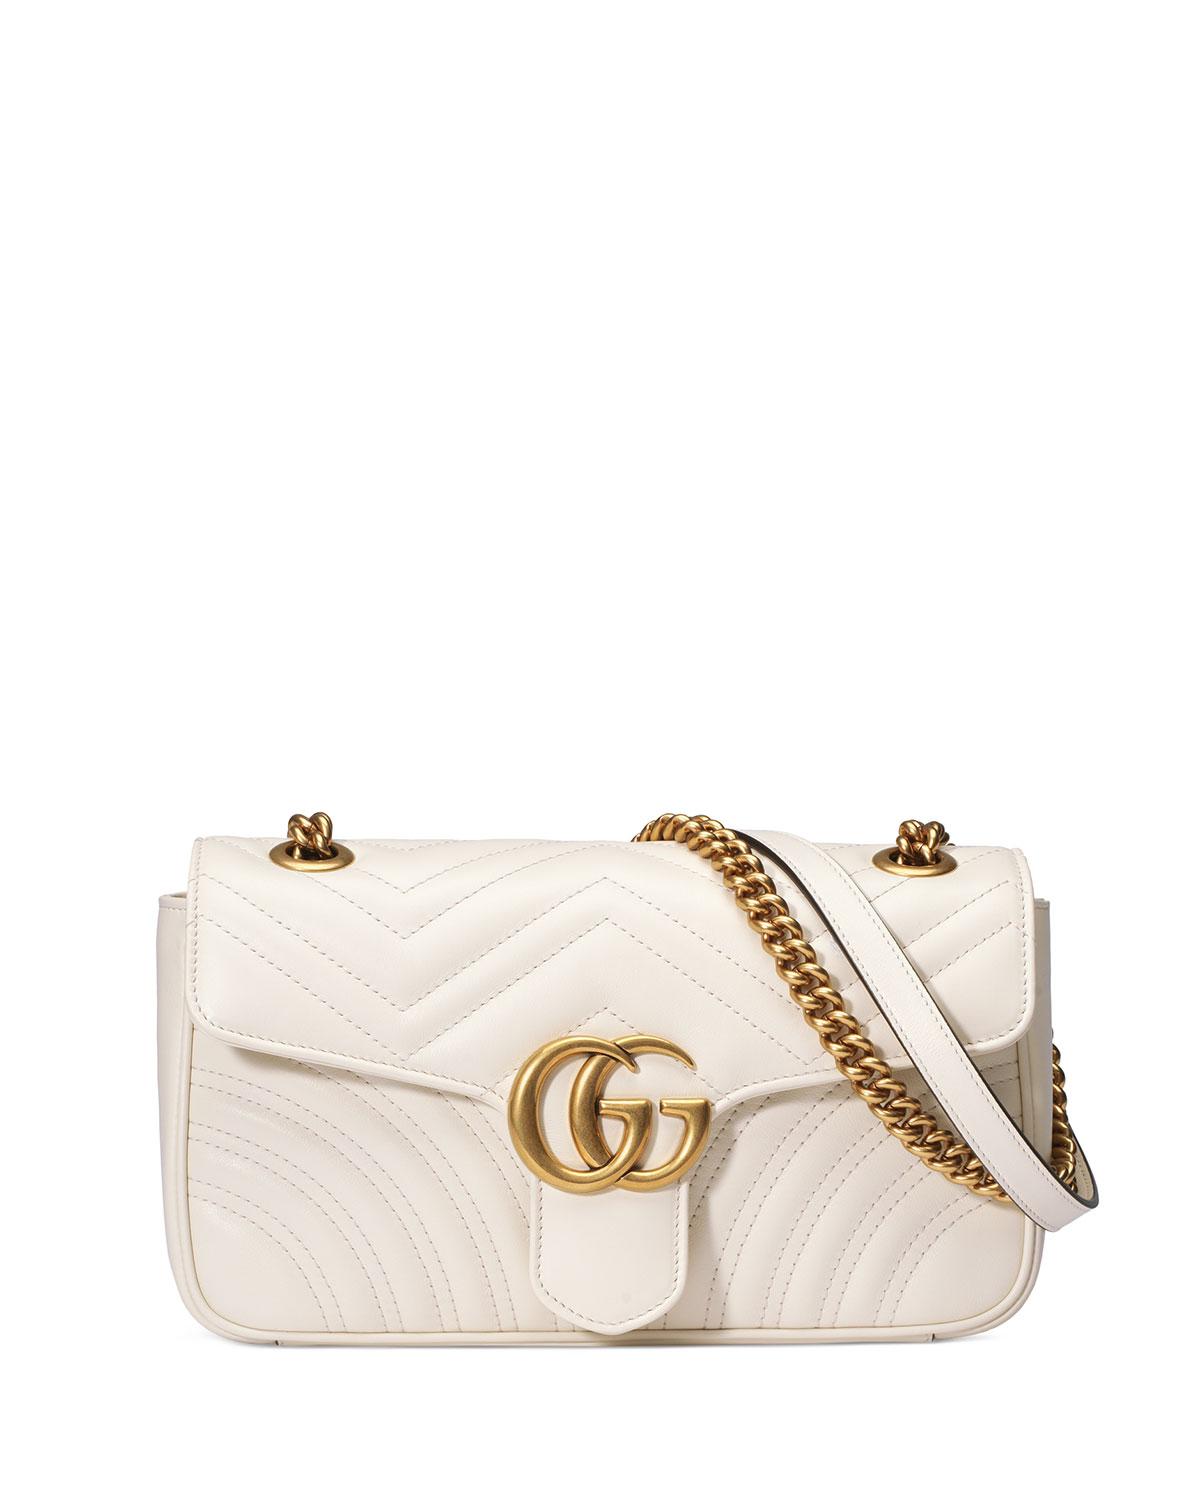 Gucci Gg Marmont Small Matelassé Shoulder Bag in White | Lyst